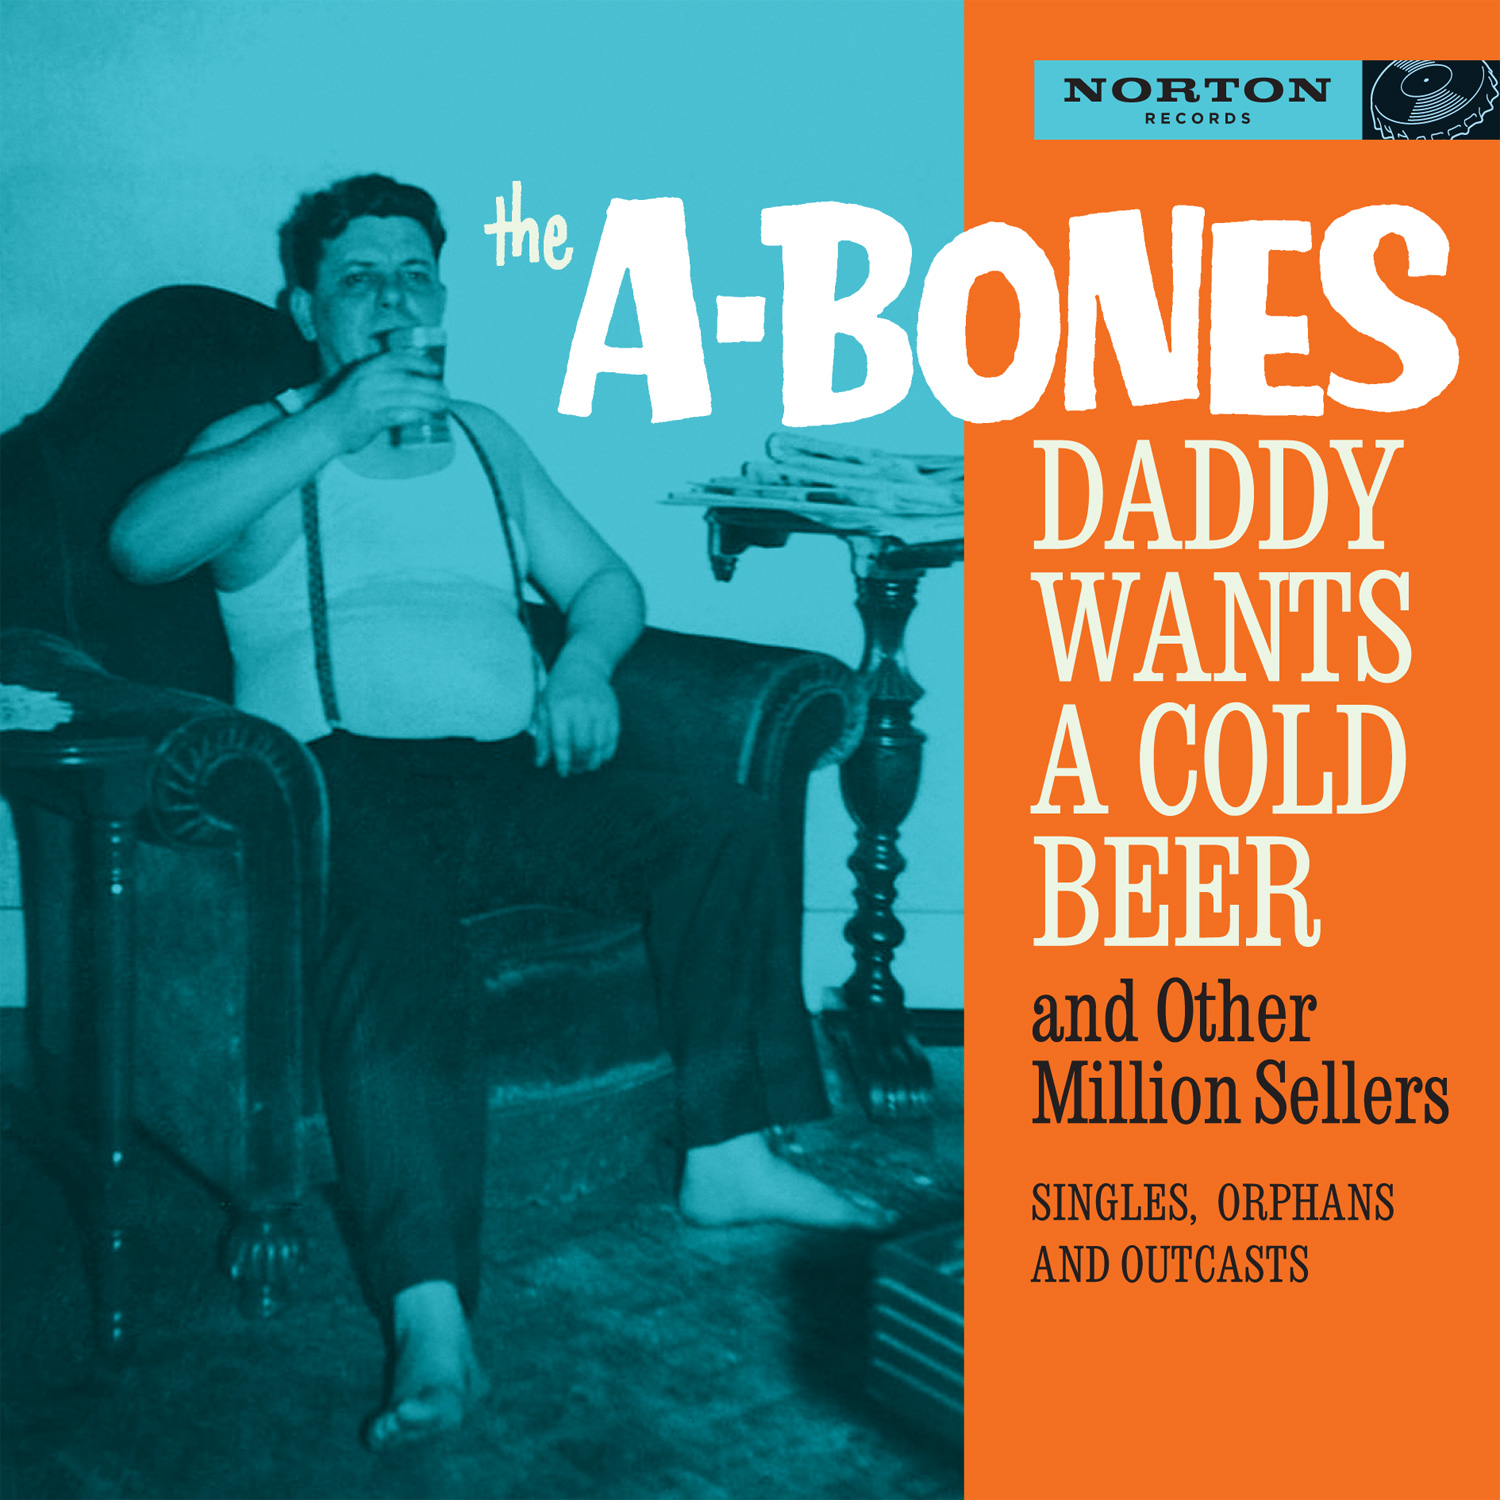 The A-Bones - Daddy Wants a Cold Beer CD cover